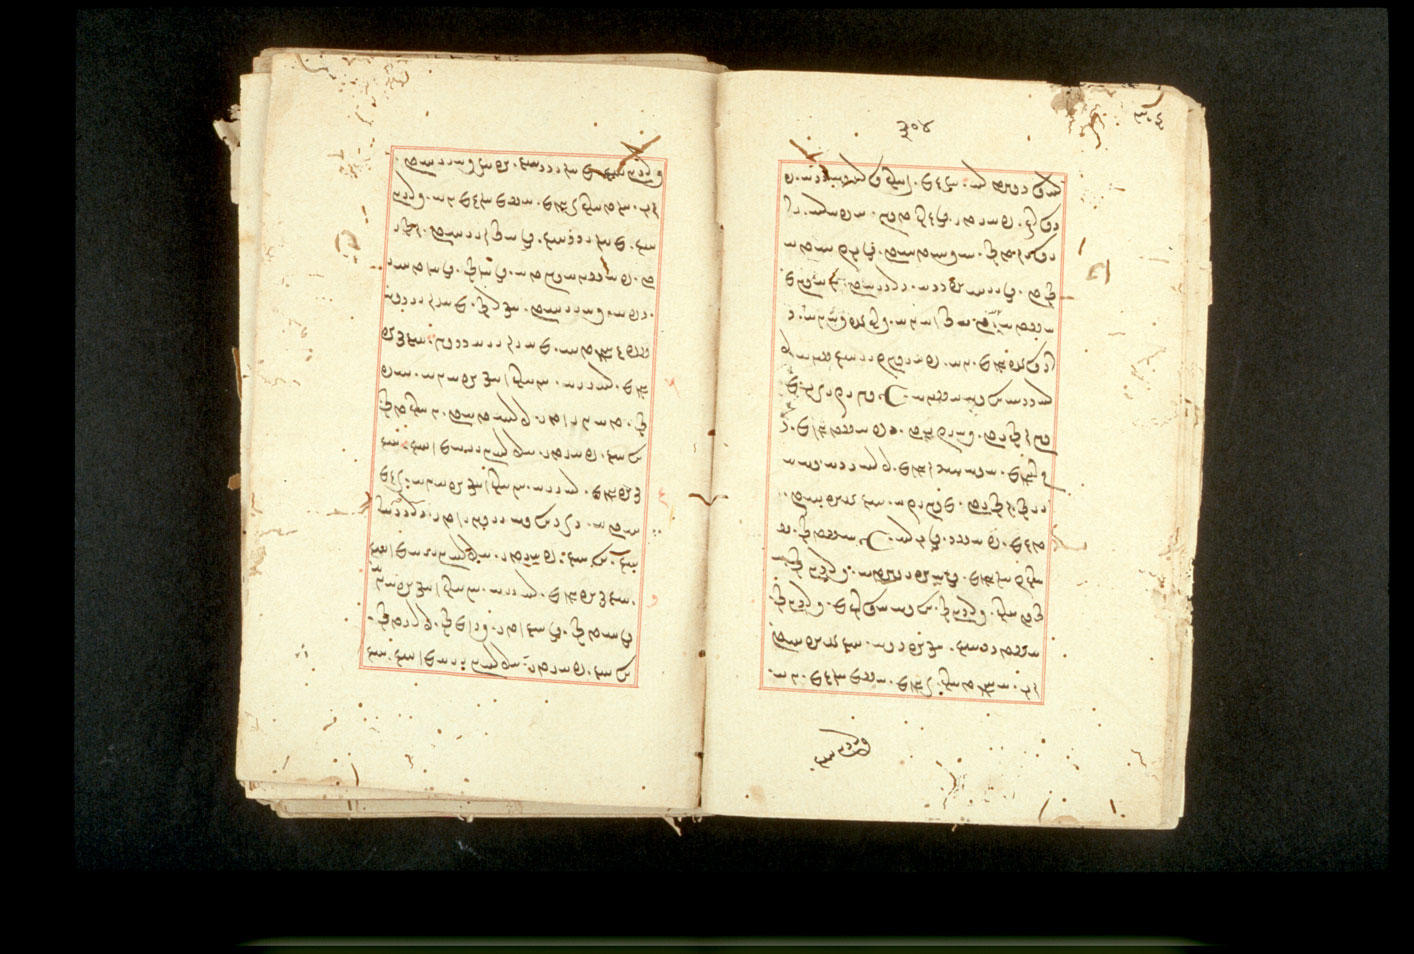 Folios 304v (right) and 305r (left)